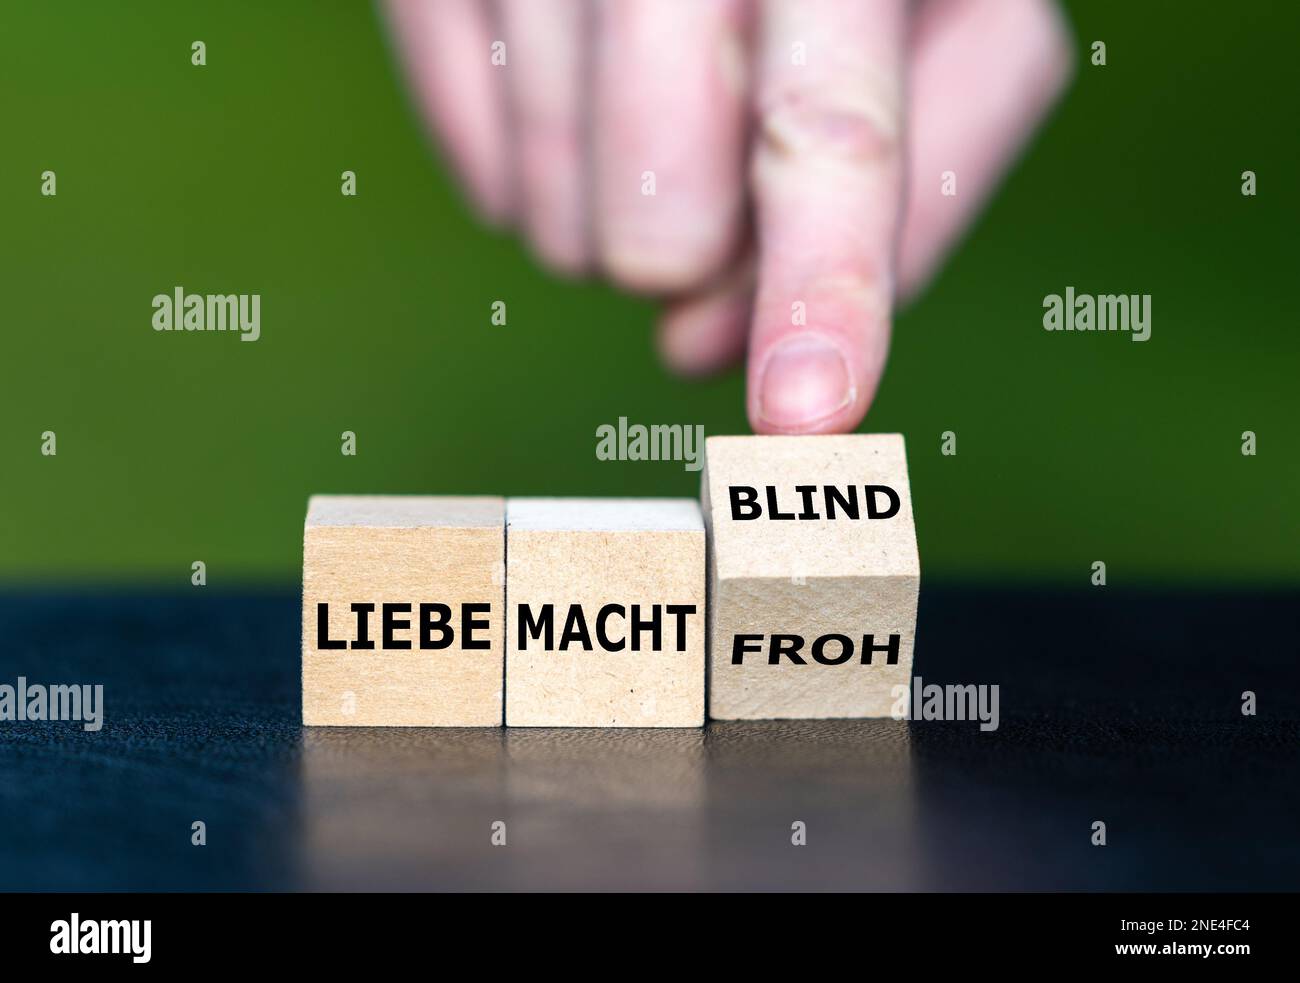 Hand turns wooden cubes and changes the German saying 'liebe macht froh' (love makes happy) to 'liebe macht blind' (love makes blind). Stock Photo